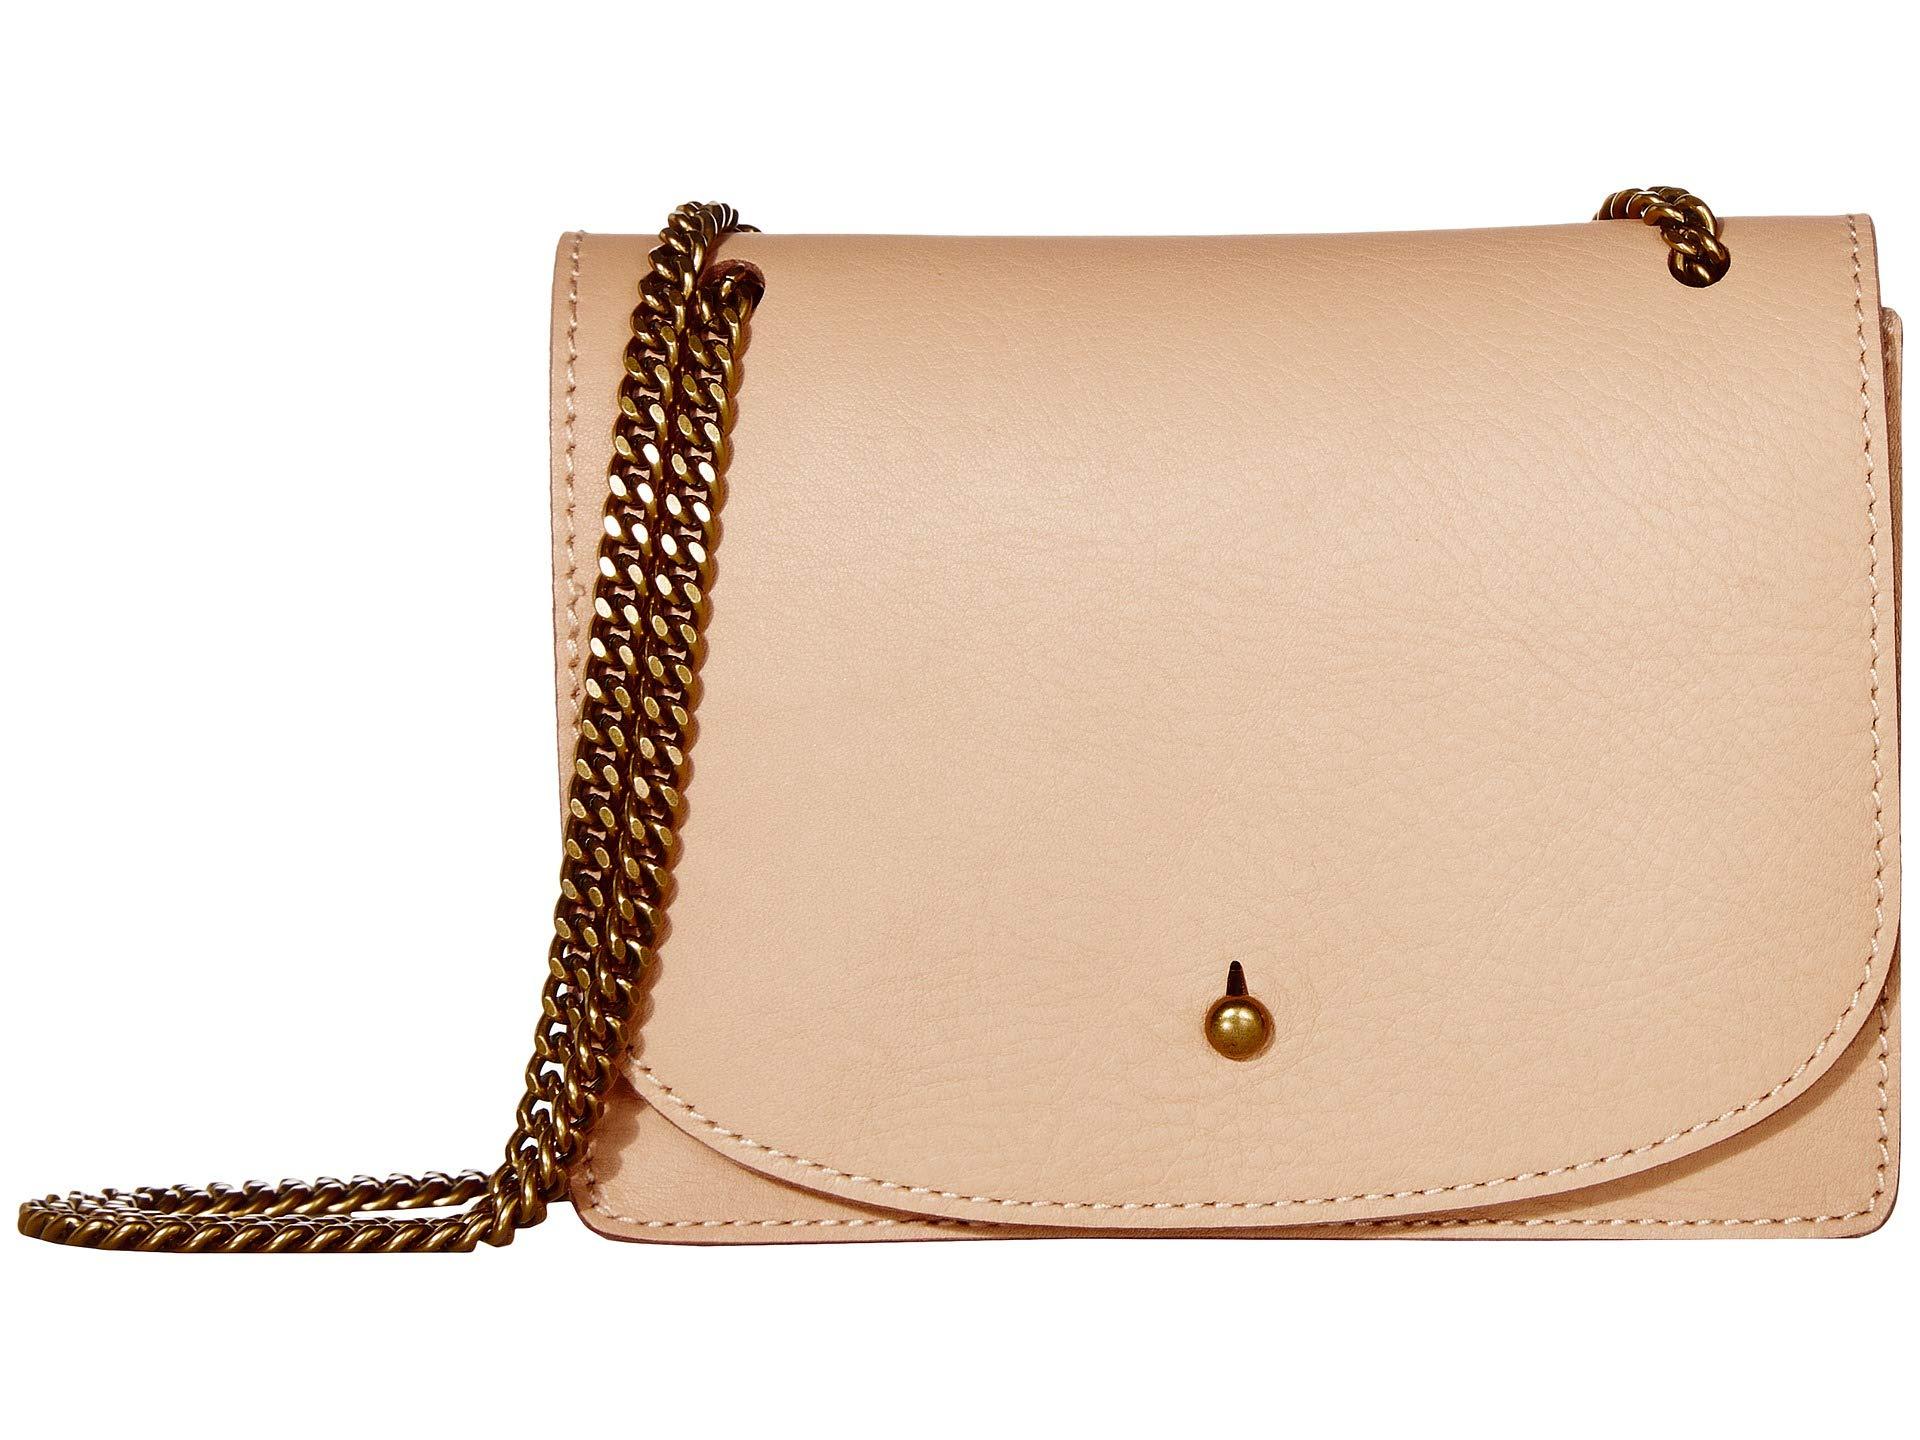 Madewell Leather The Chain Crossbody Bag in Beige (Natural) - Lyst